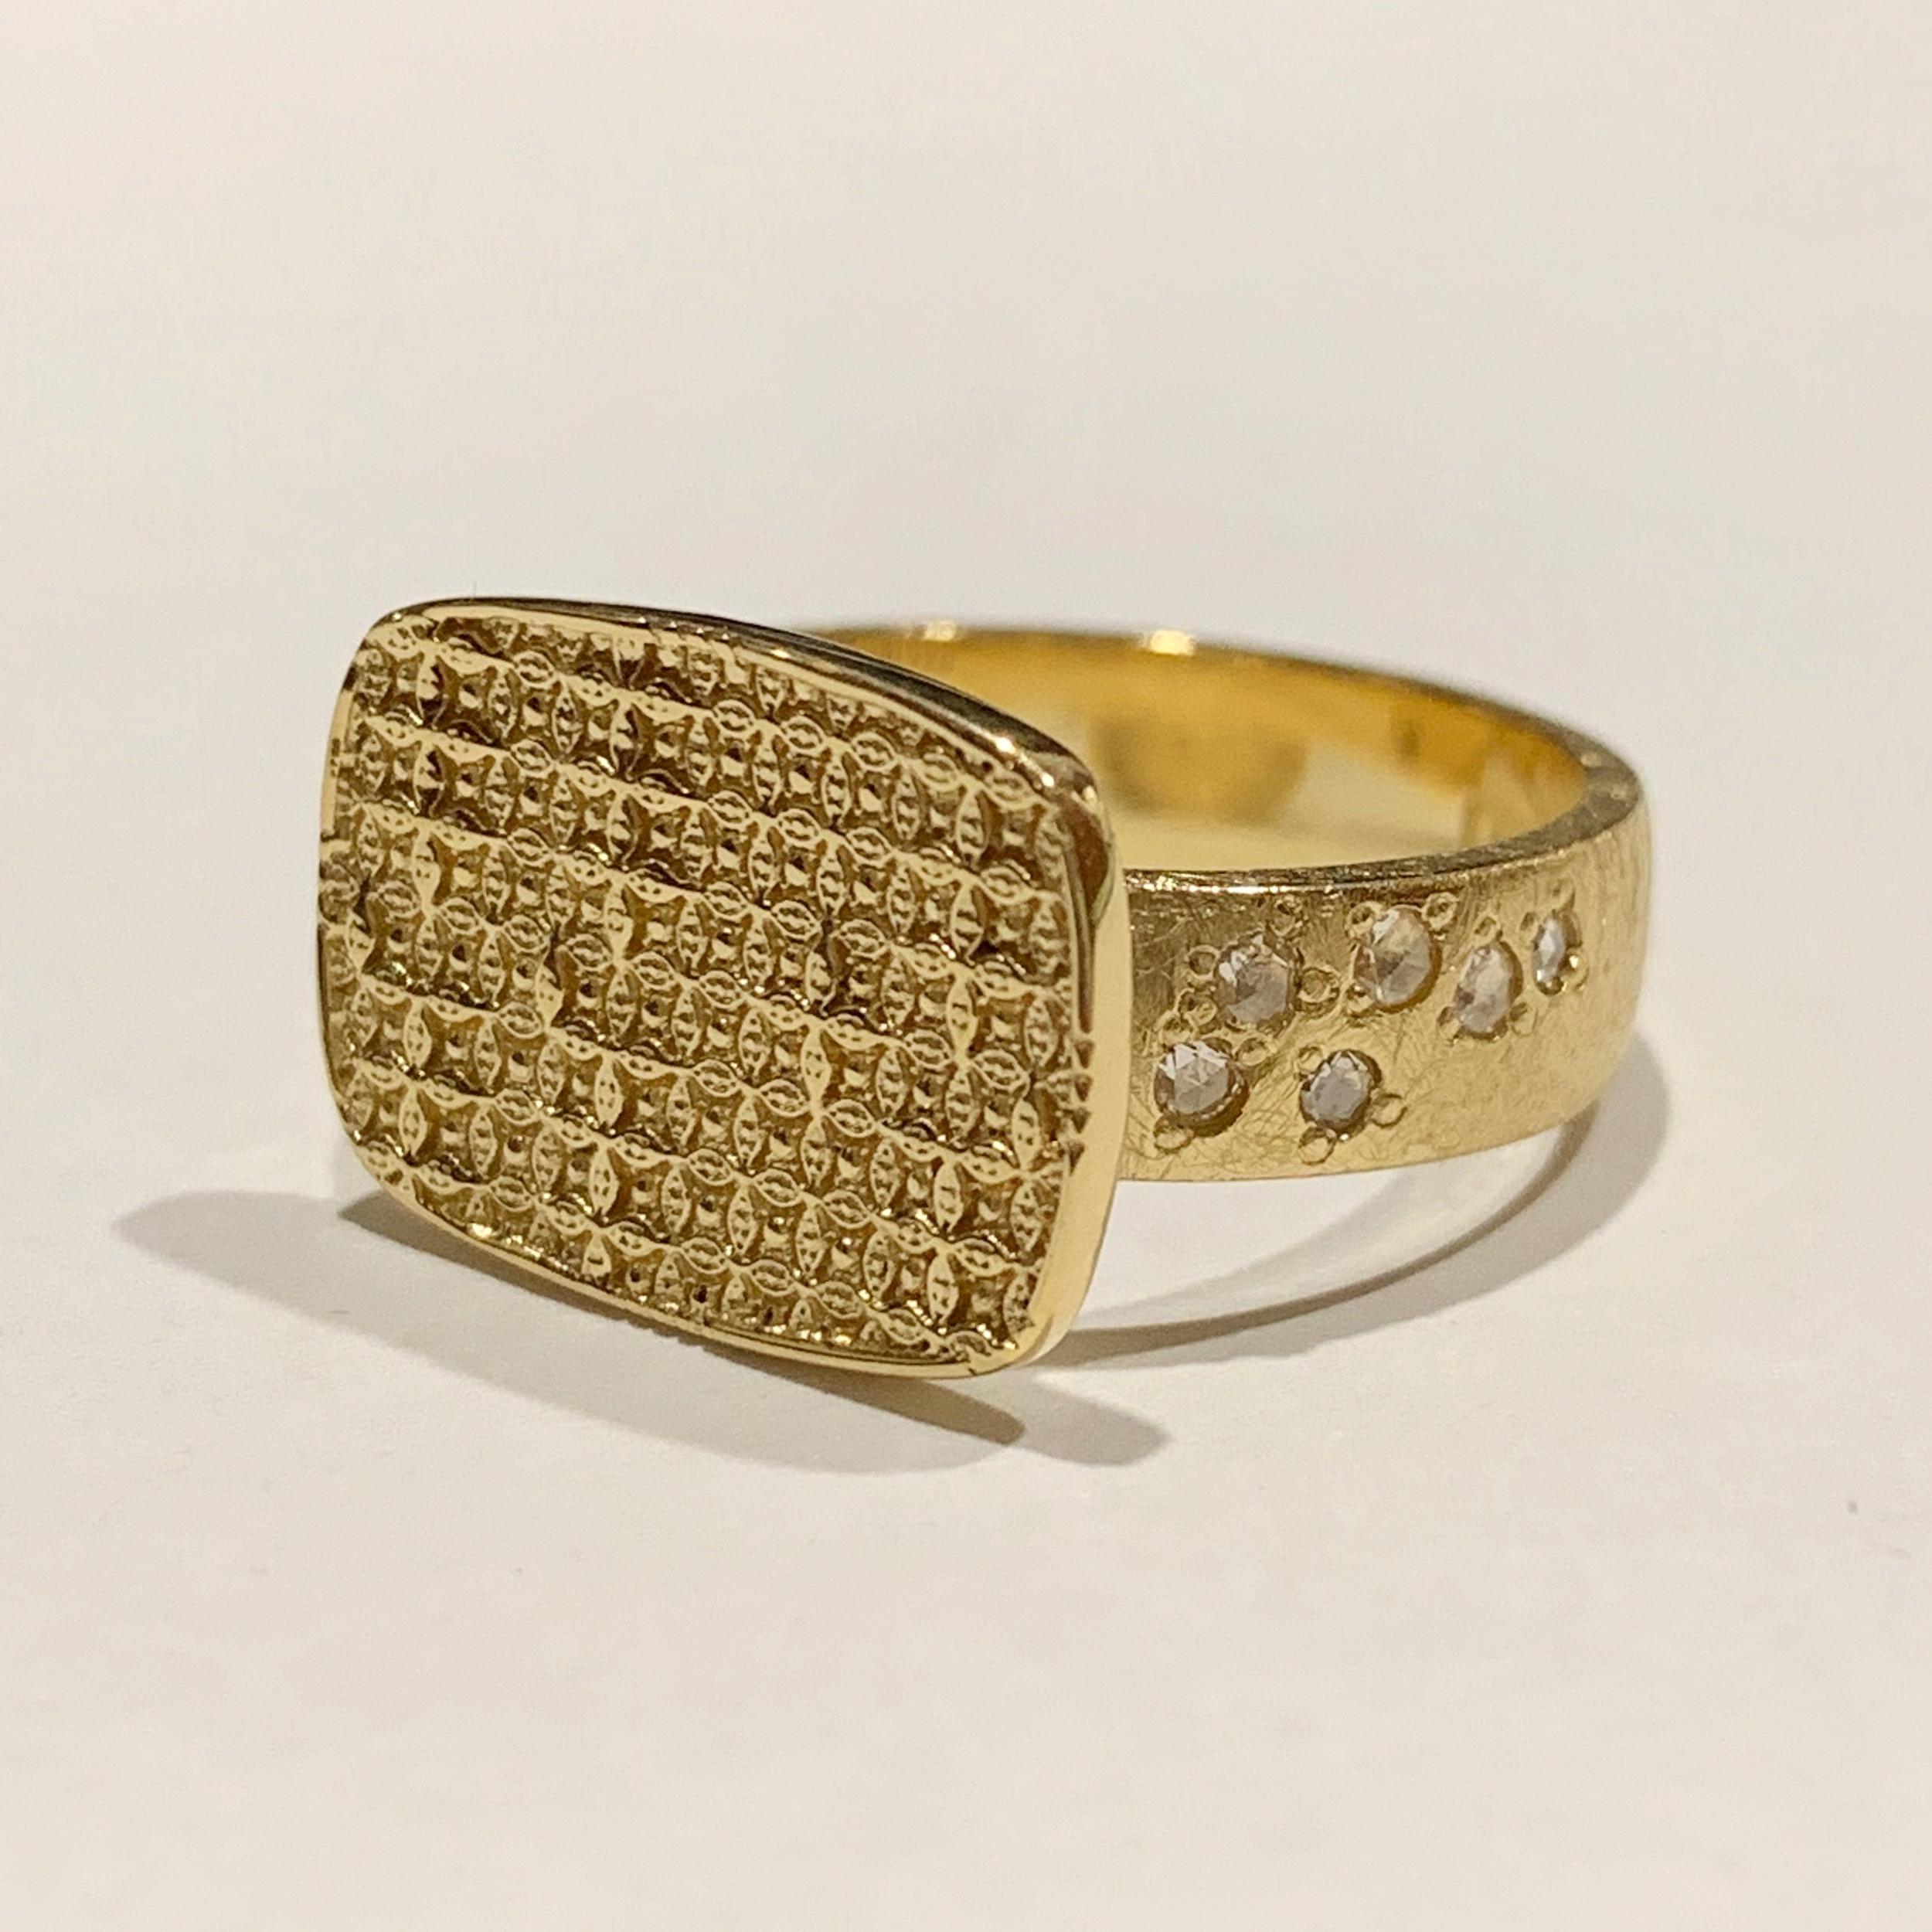 Women's or Men's Luca Jouel Rose Cut Diamond Antique Patterned Statement Ring in 18 Carat Gold For Sale